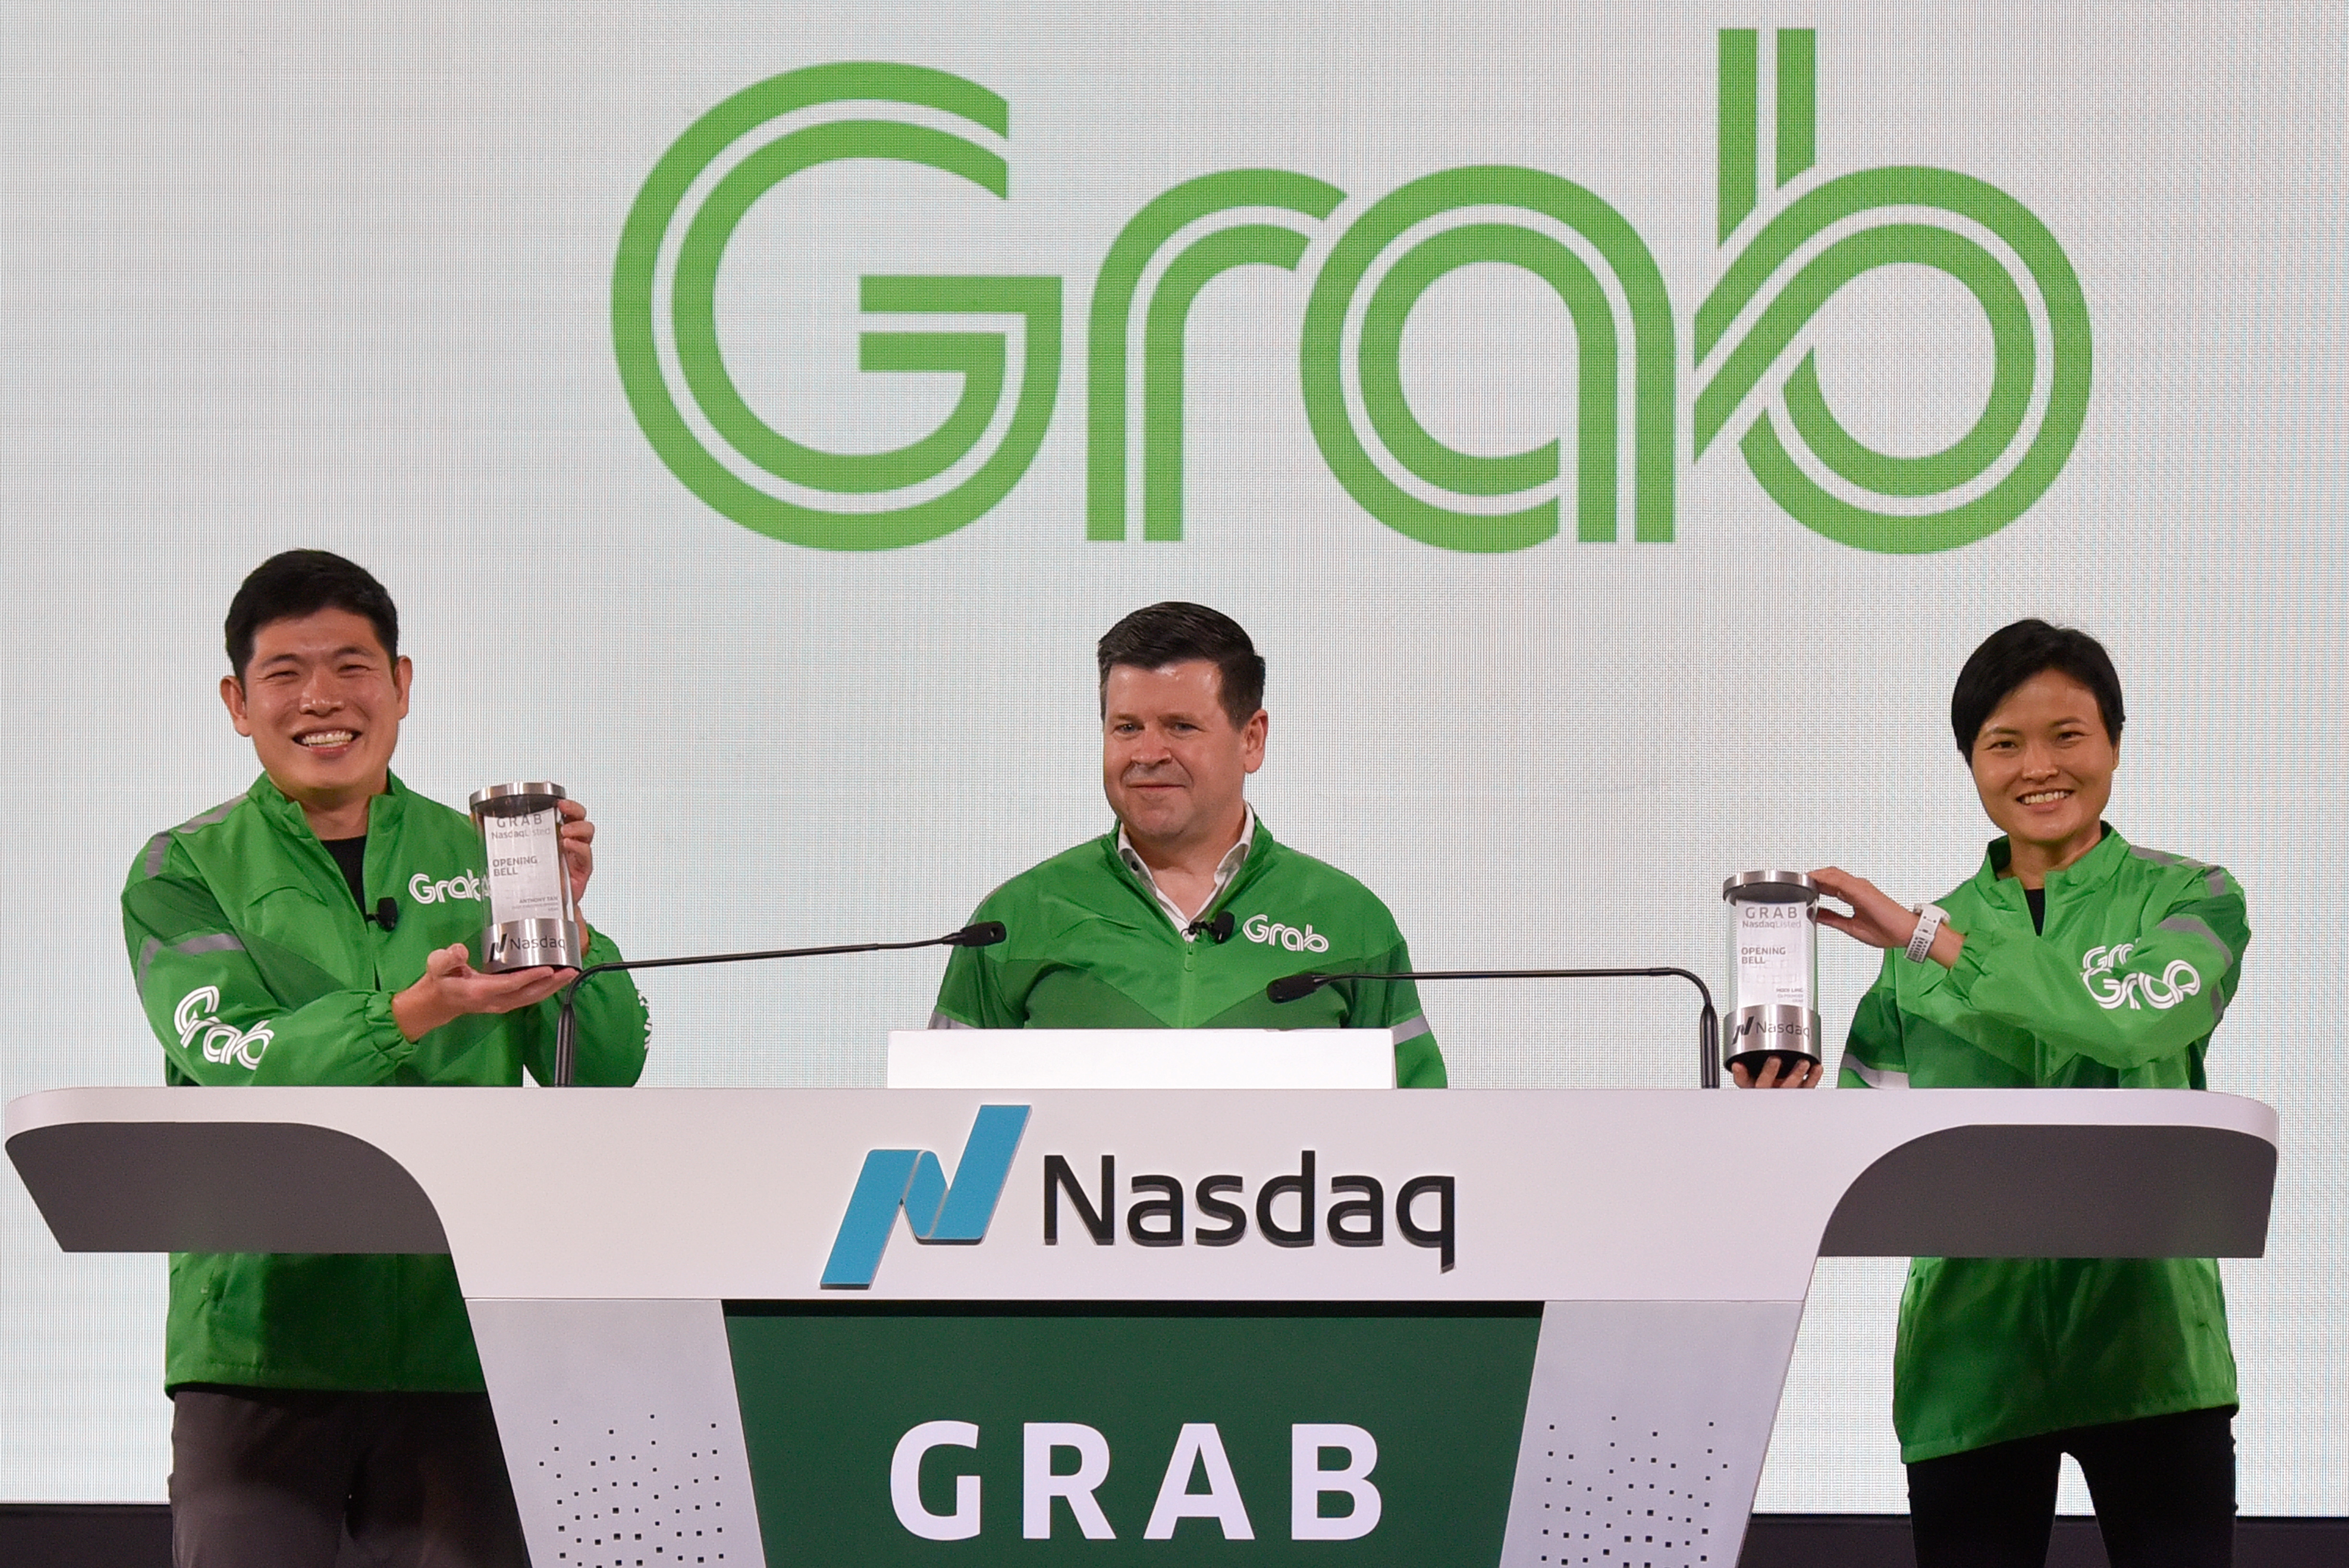 Grab's CEO Anthony Tan and co-founder Tan Hooi Ling hold up the Nasdaq Crystal at the Grab Bell Ringing Ceremony in Singapore